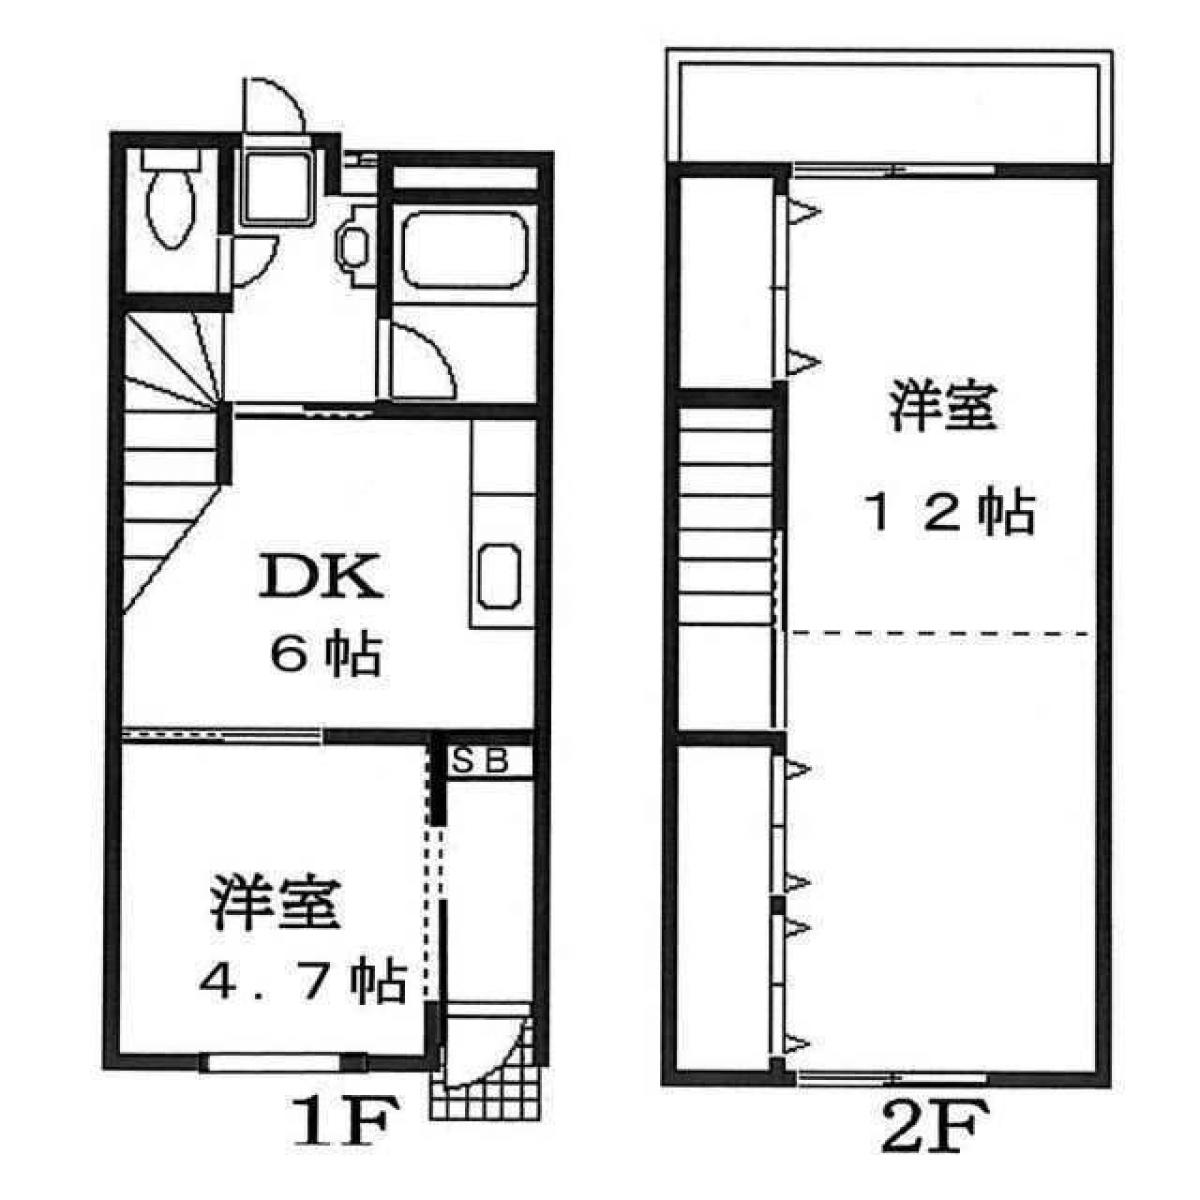 Picture of Home For Sale in Kita Ku, Tokyo, Japan